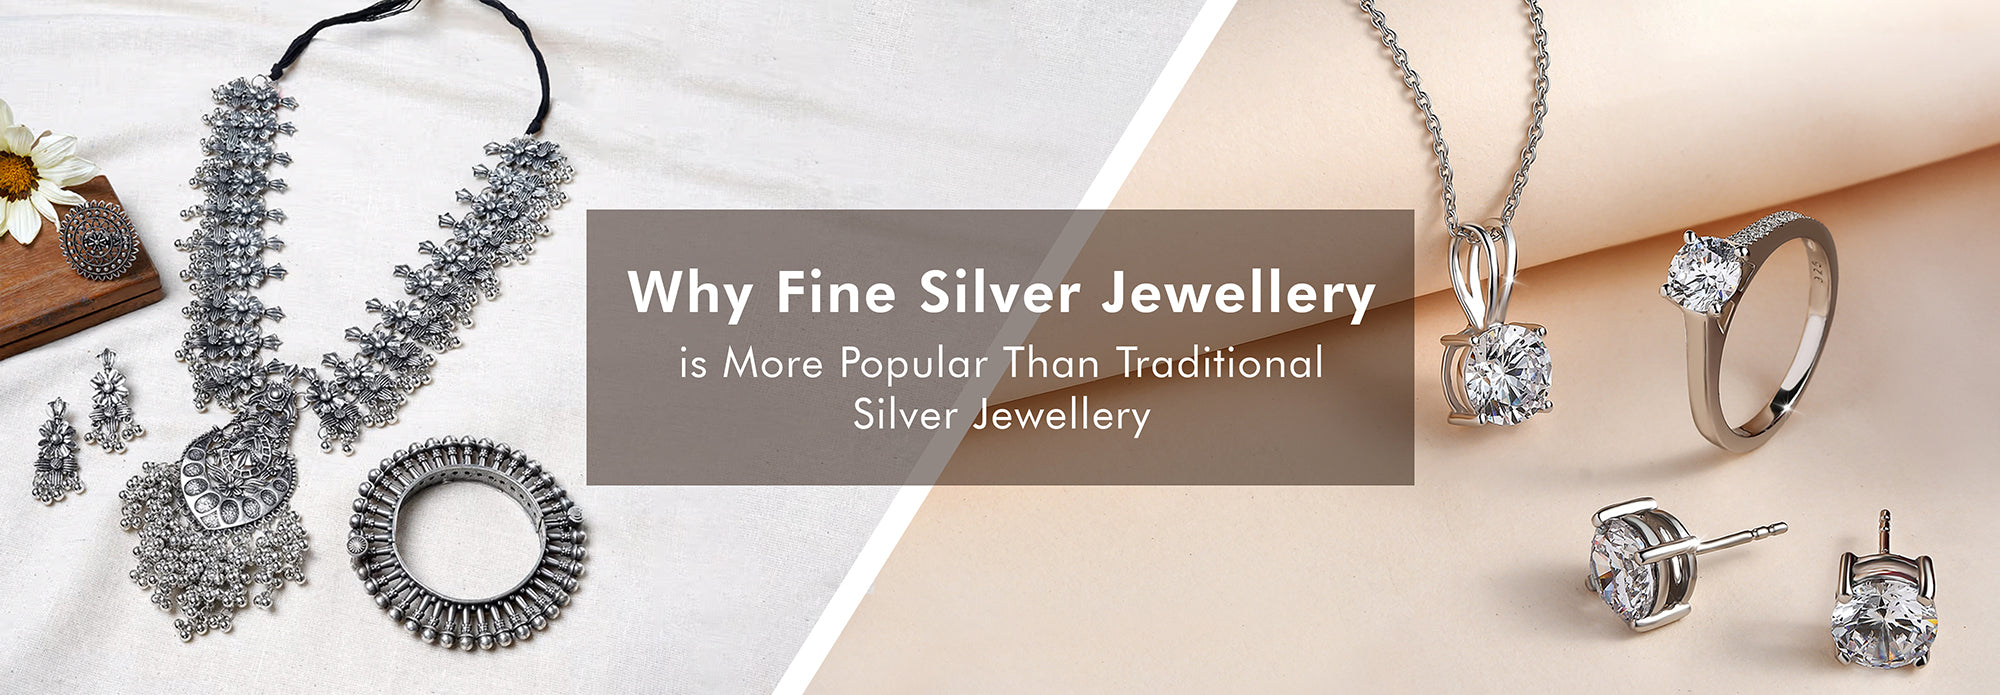 Why Fine Silver Jewellery is More Popular Than Traditional Silver Jewellery